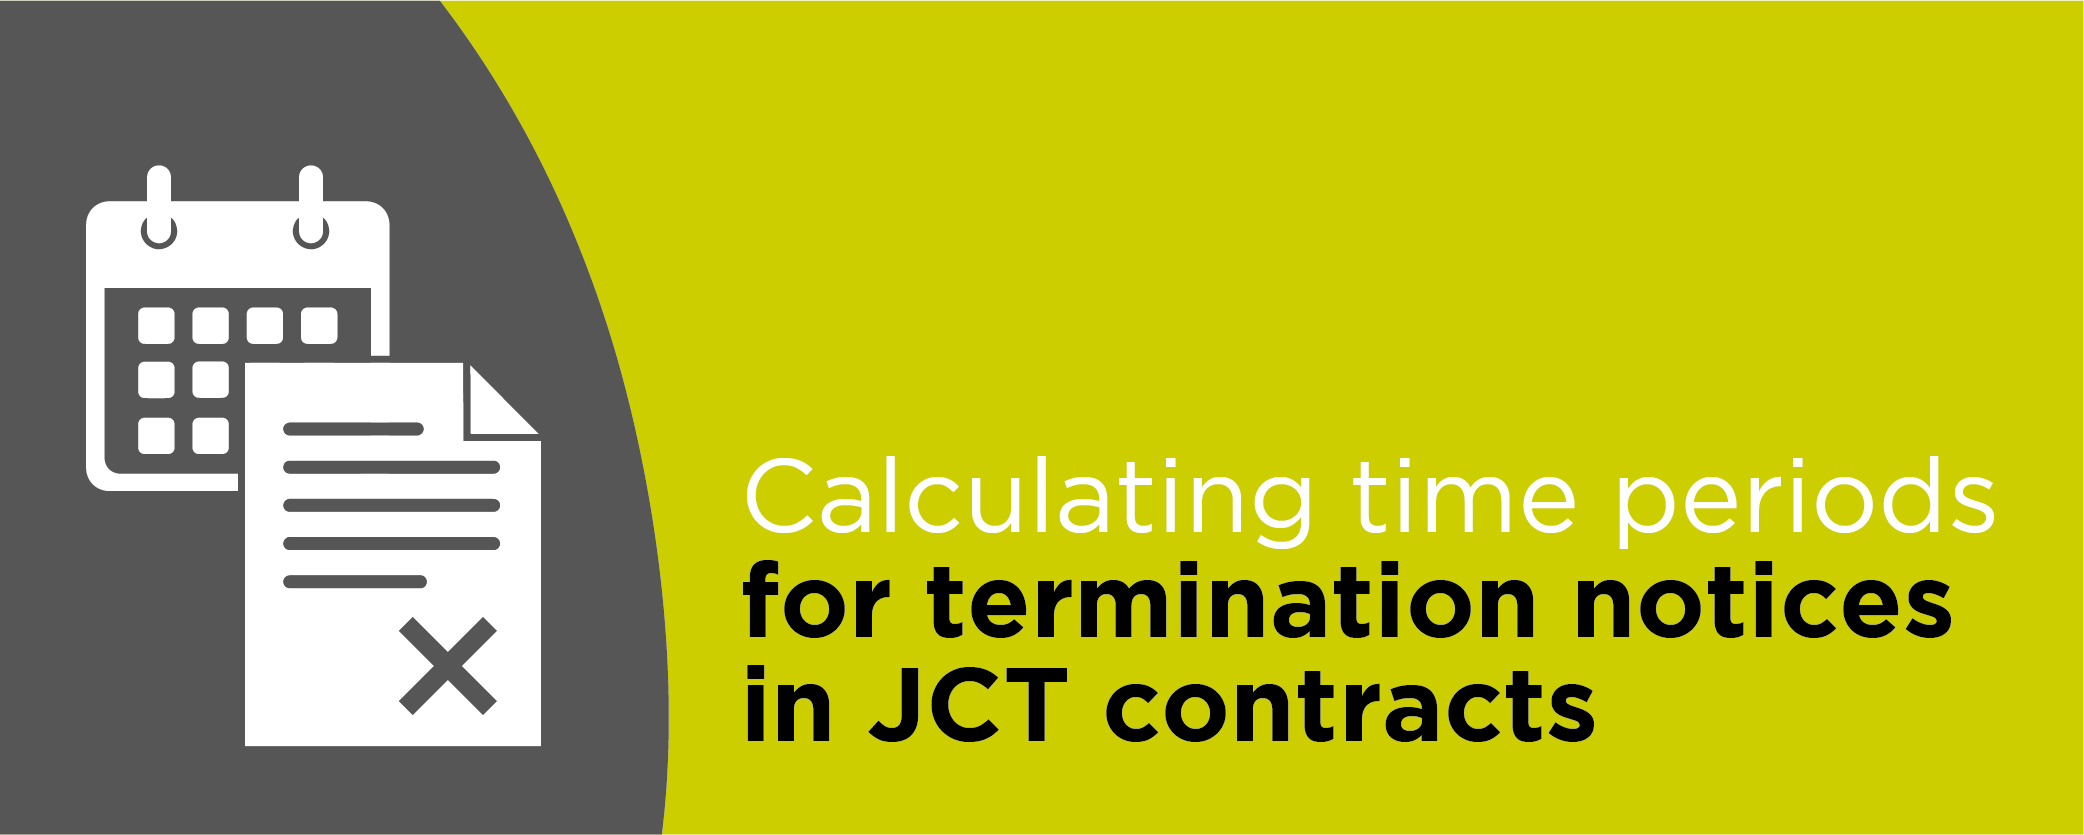 Calculating time periods for termination notices in JCT contracts